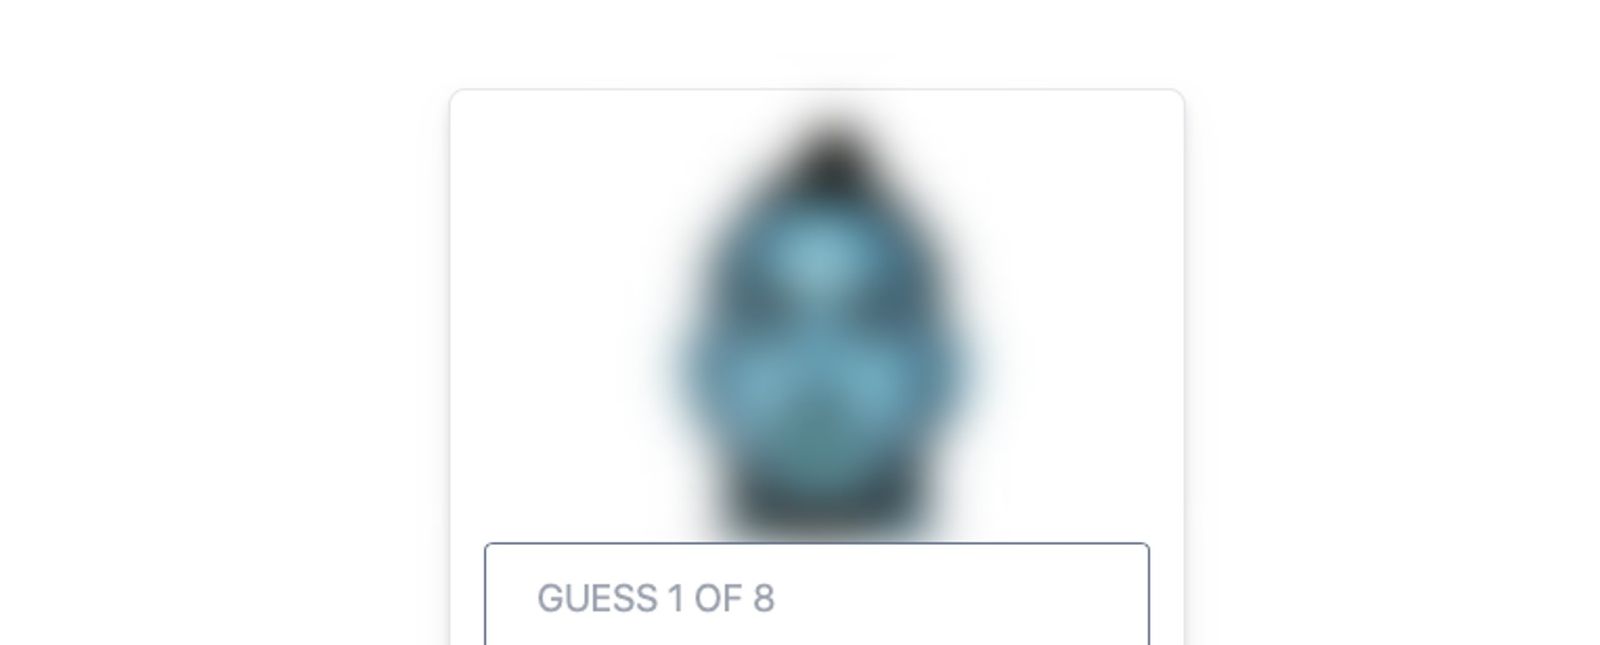 Image of the initial guessing screen in Who Are Ya?